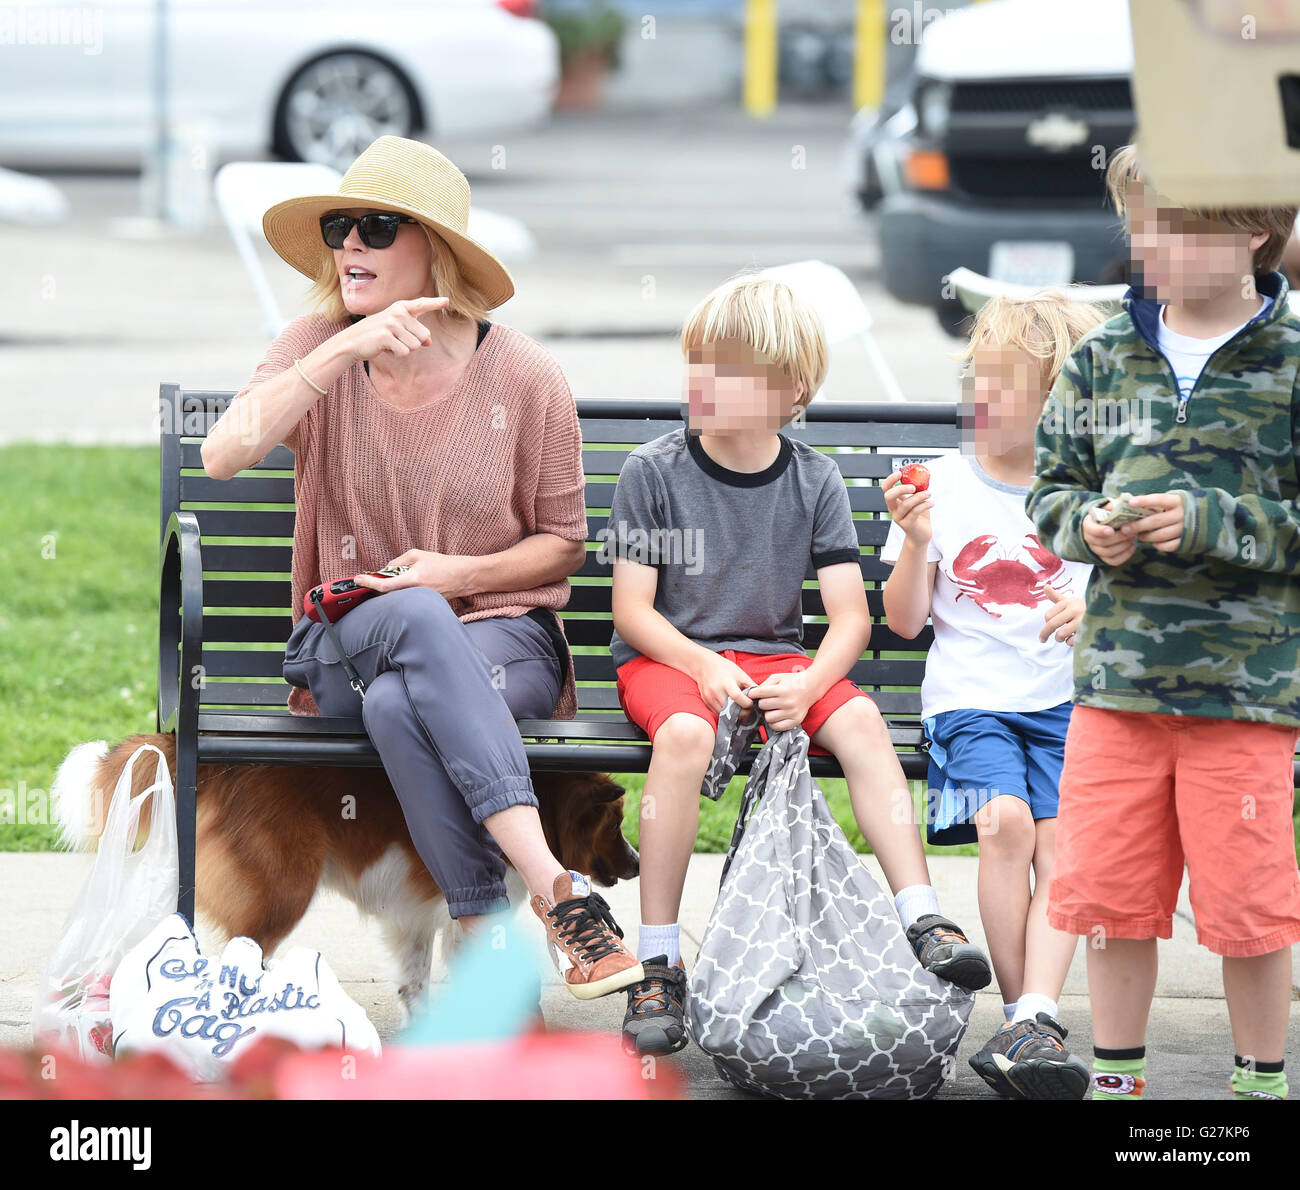 Julie Bowen entertains her three boys during a trip to the Farmers Market  Featuring: Julie Bowen, Oliver McLanahan Phillips, John Phillips, Gustav Phillips Where: Los Angeles, California, United States When: 10 Apr 2016 Stock Photo